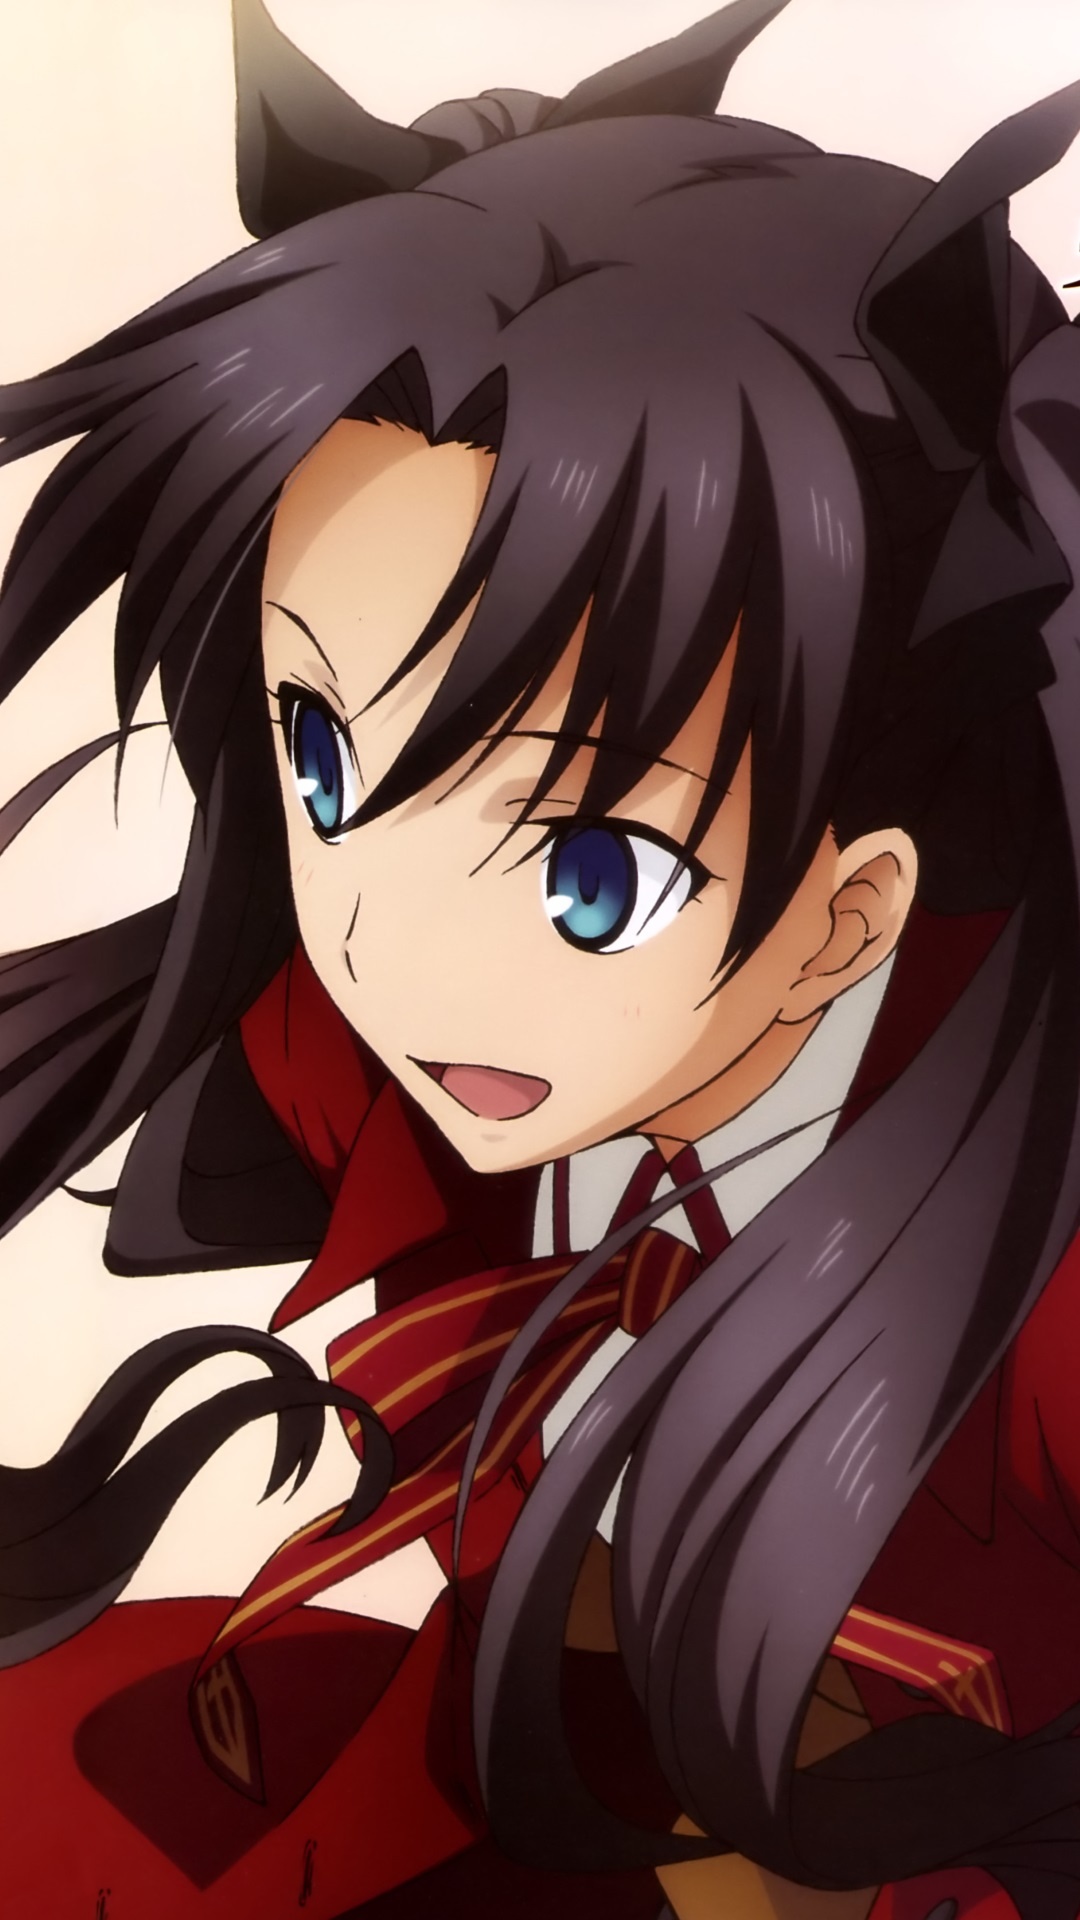 Fate/stay night: Unlimited Blade Works, Rin Tohsaka wallpapers, 1080x1920 Full HD Handy